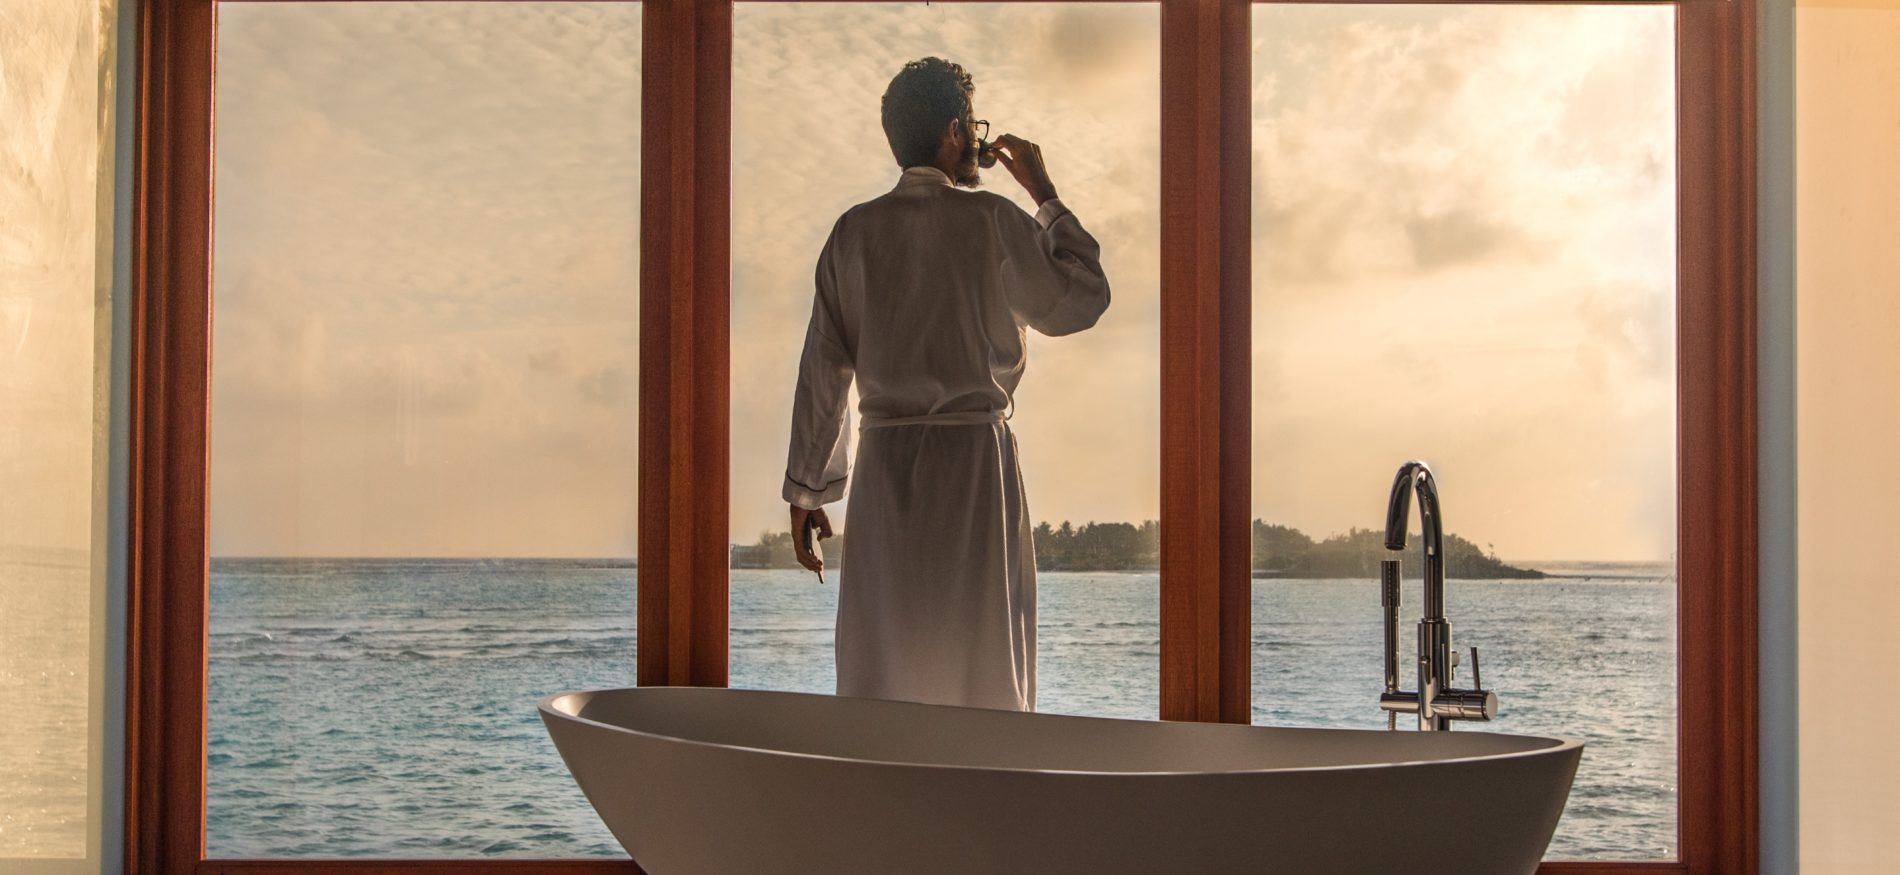 Man looking out to sunset, dressed in a luxurious bathrobe and beside a spectacular bath, after getting up from bed to have a cup of tea or coffee.